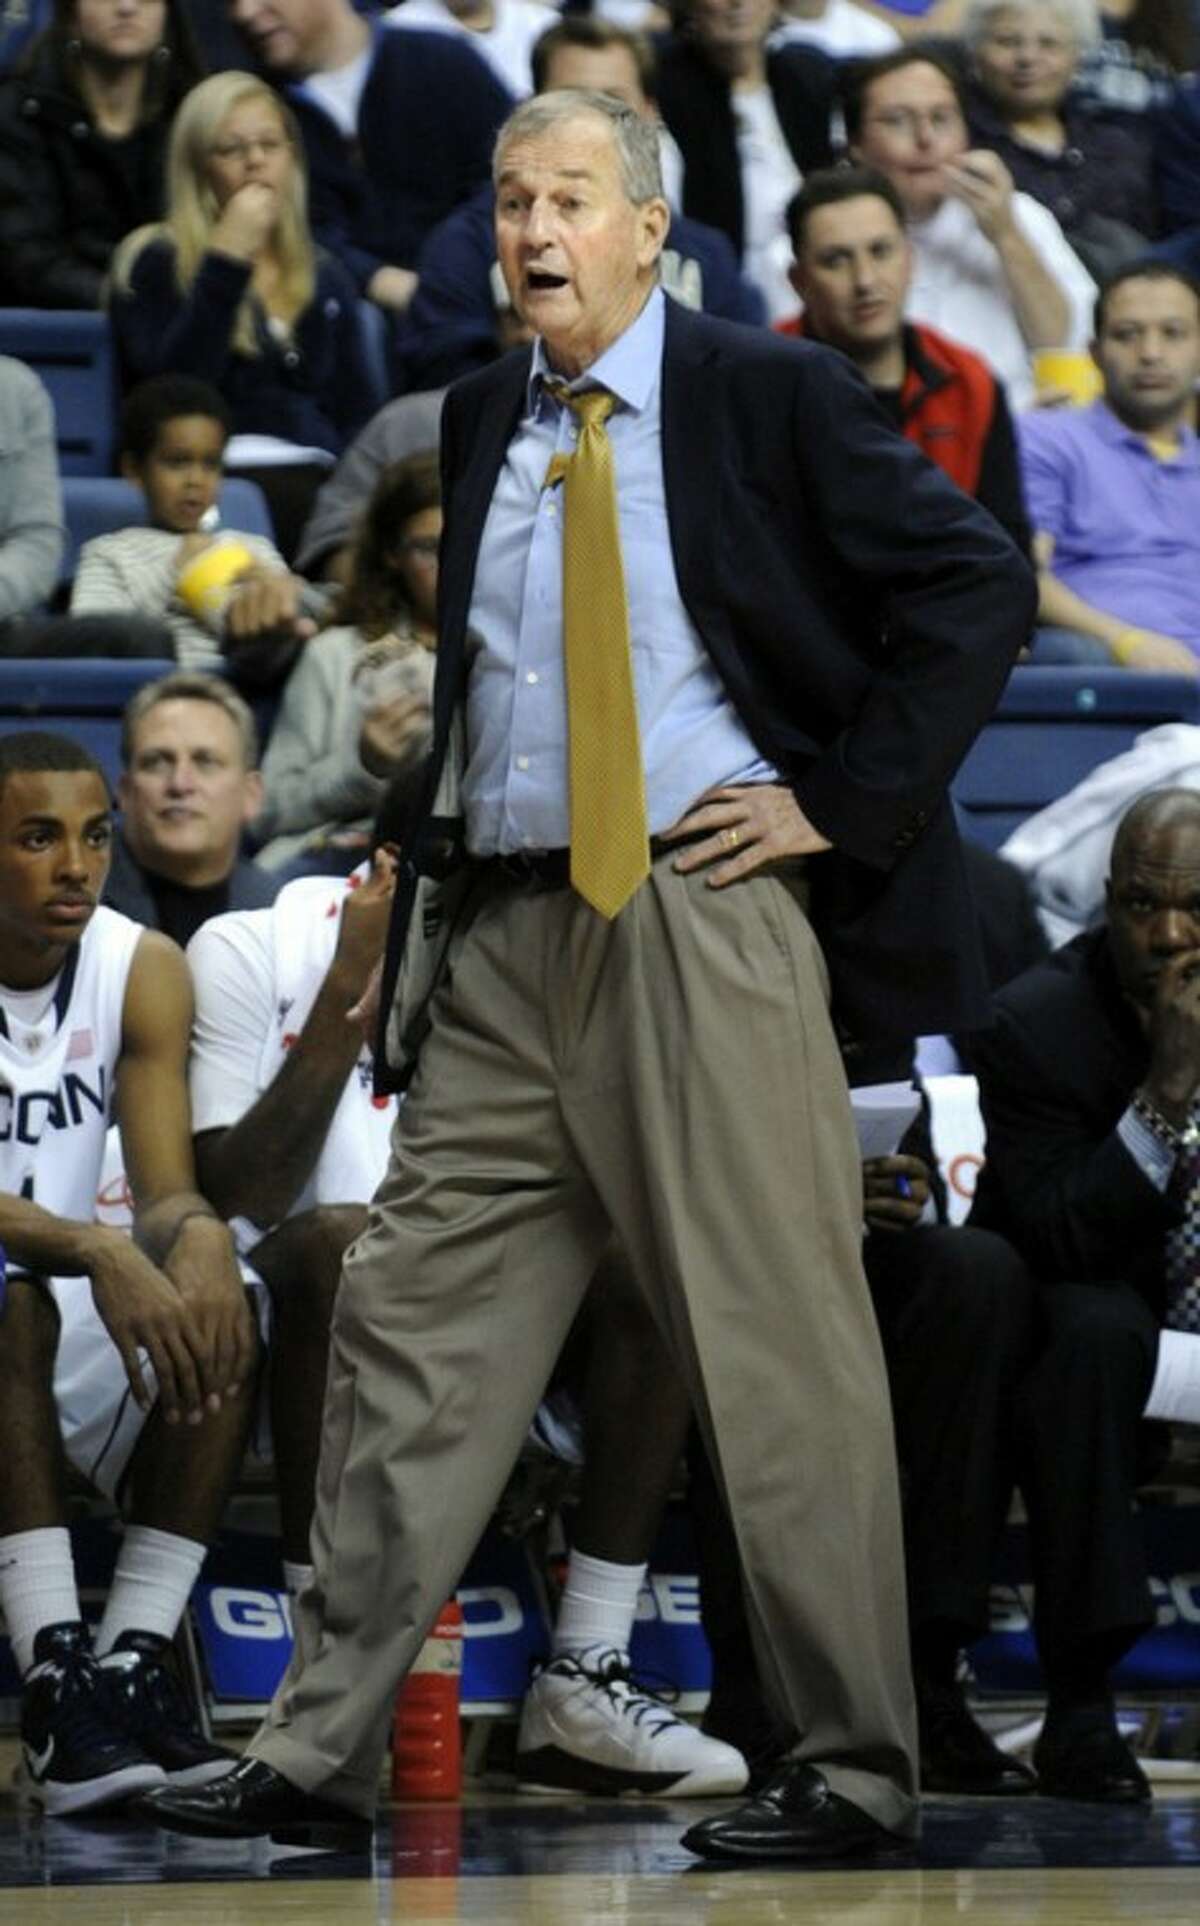 Connecticut coach Jim Calhoun reacts during the second half of his team's 70-57 victory over Columbia during their NCAA college basketball game in Storrs, Conn., on Friday, Nov. 11, 2011. (AP Photo/Fred Beckham)